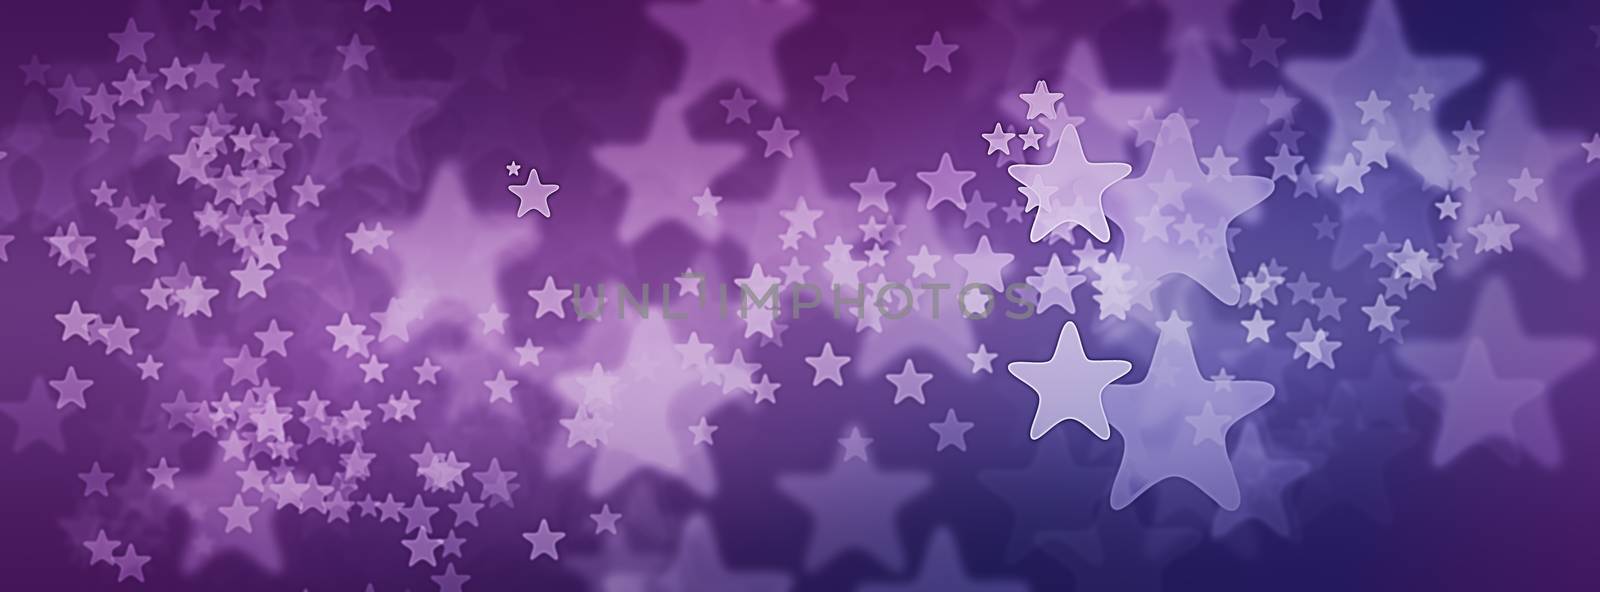 Stars on Purple Starry Background for illustration for Facebook Cover Photo